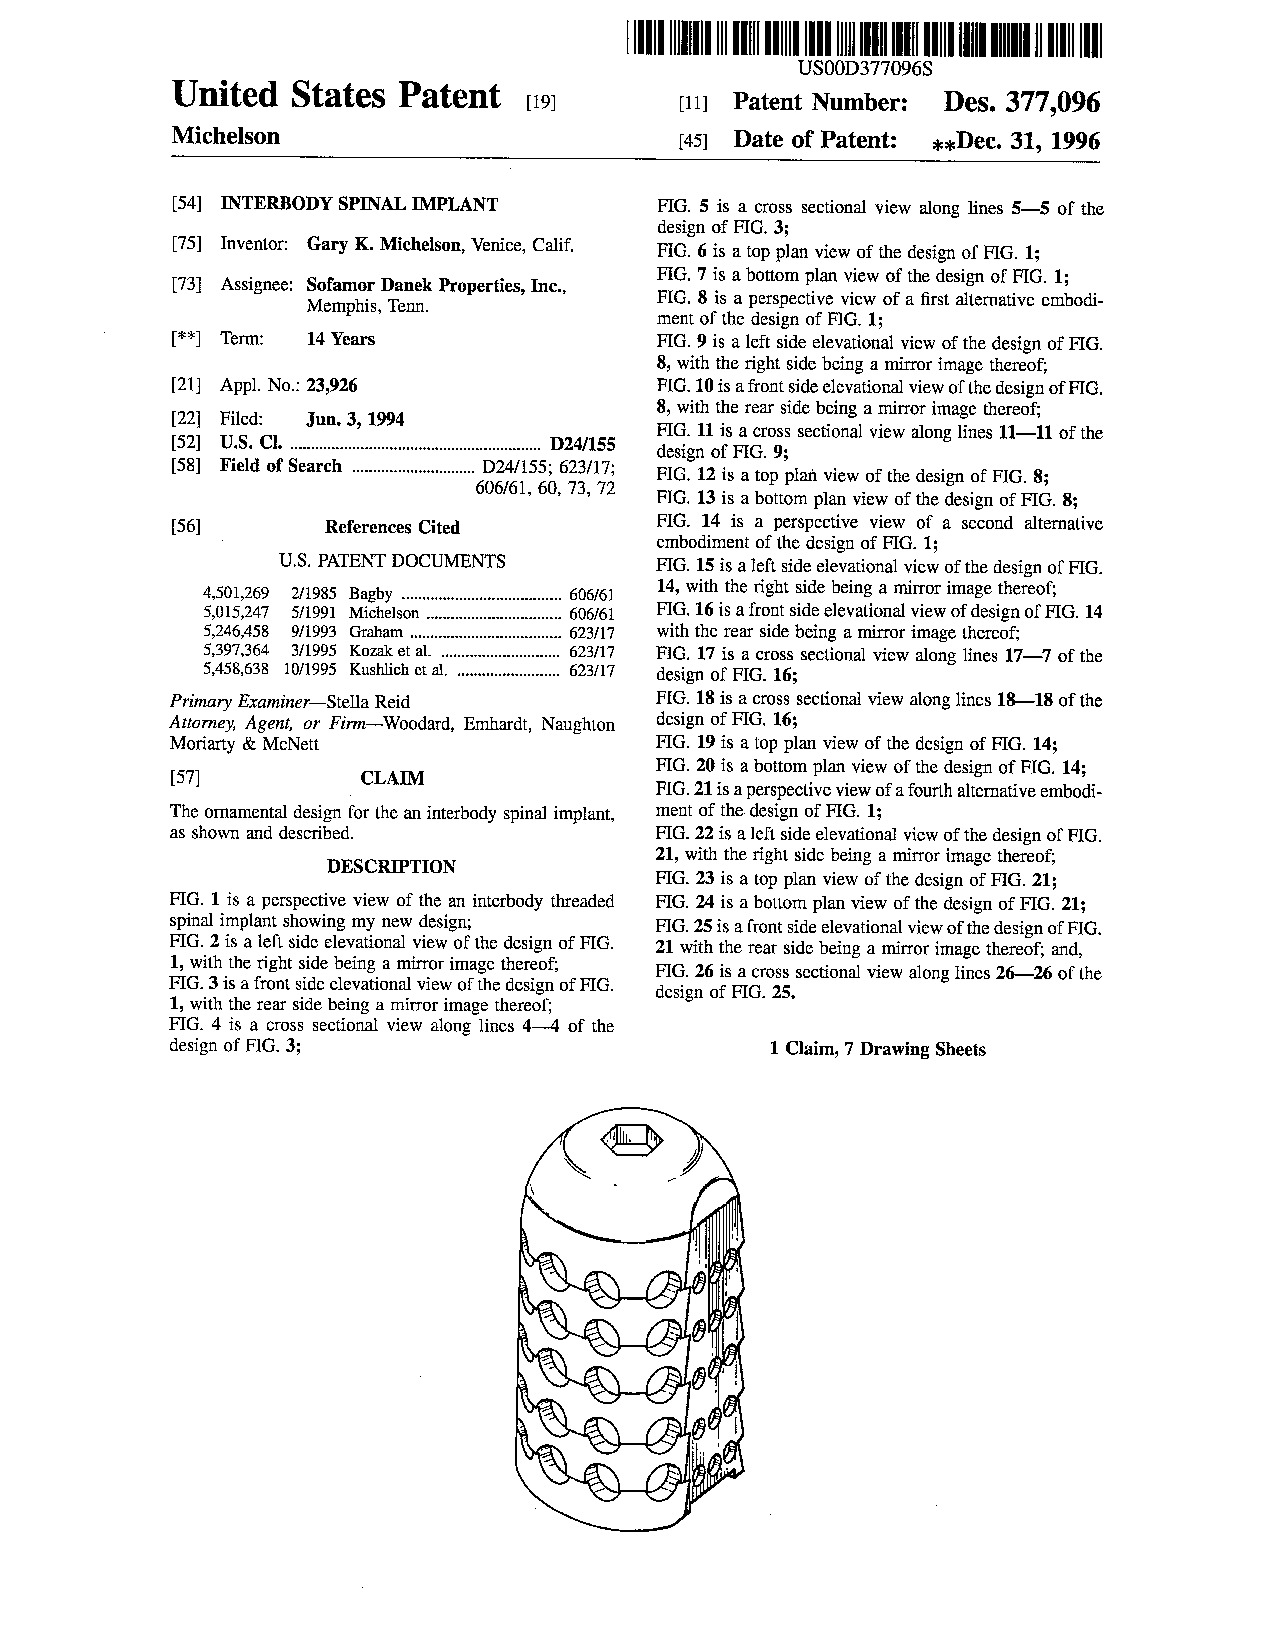 Interbody spinal implant - Patent D377,096